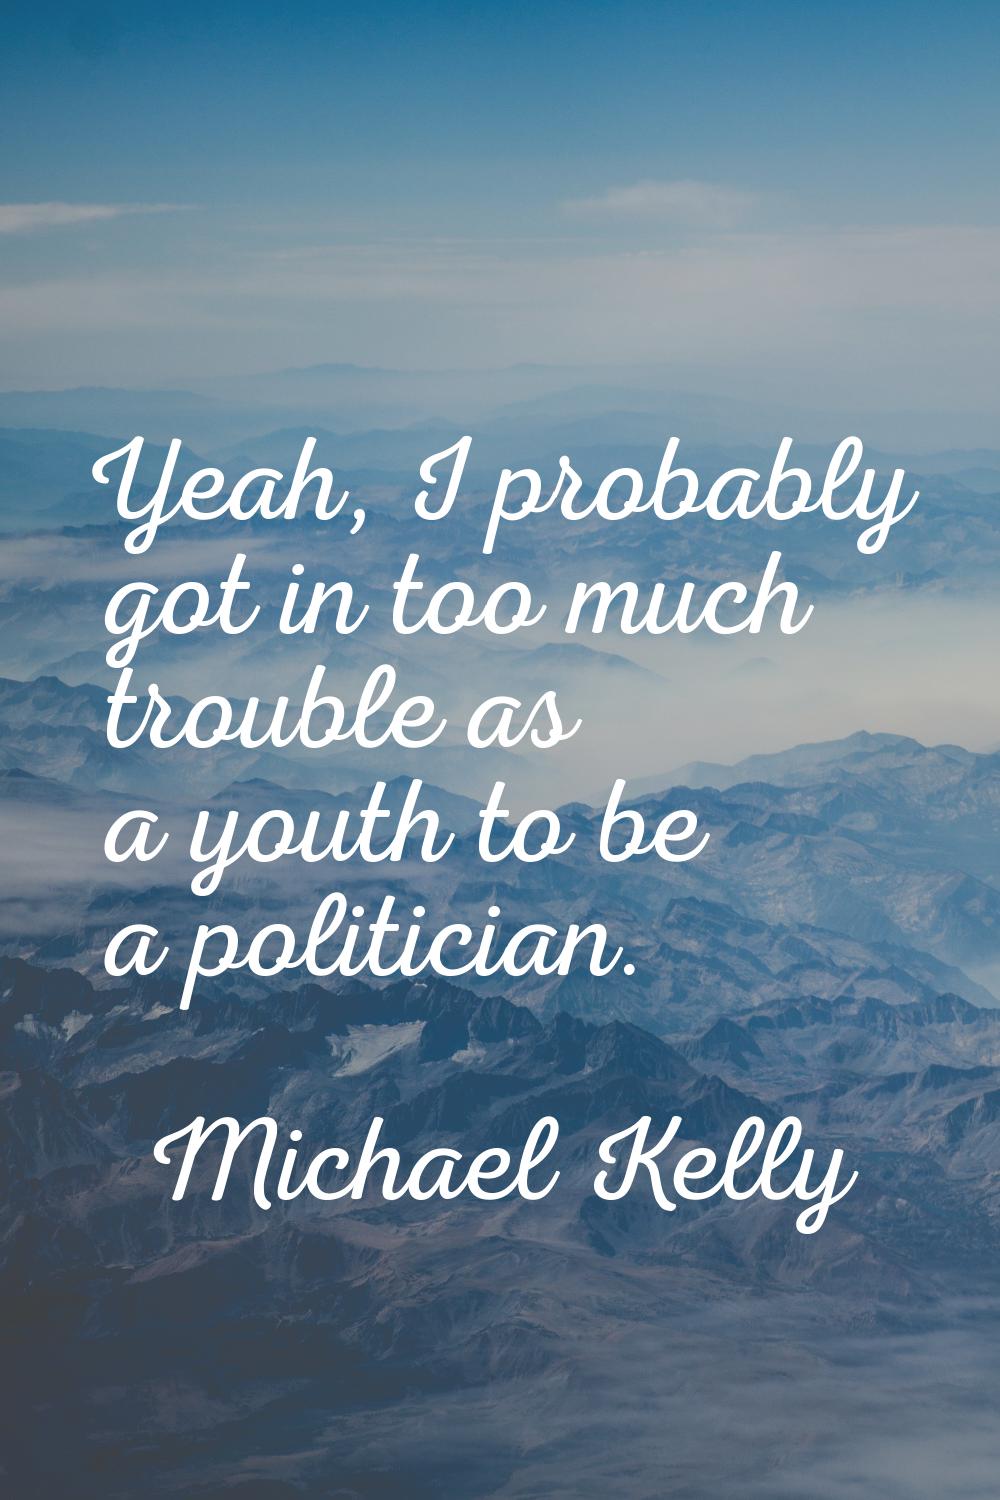 Yeah, I probably got in too much trouble as a youth to be a politician.